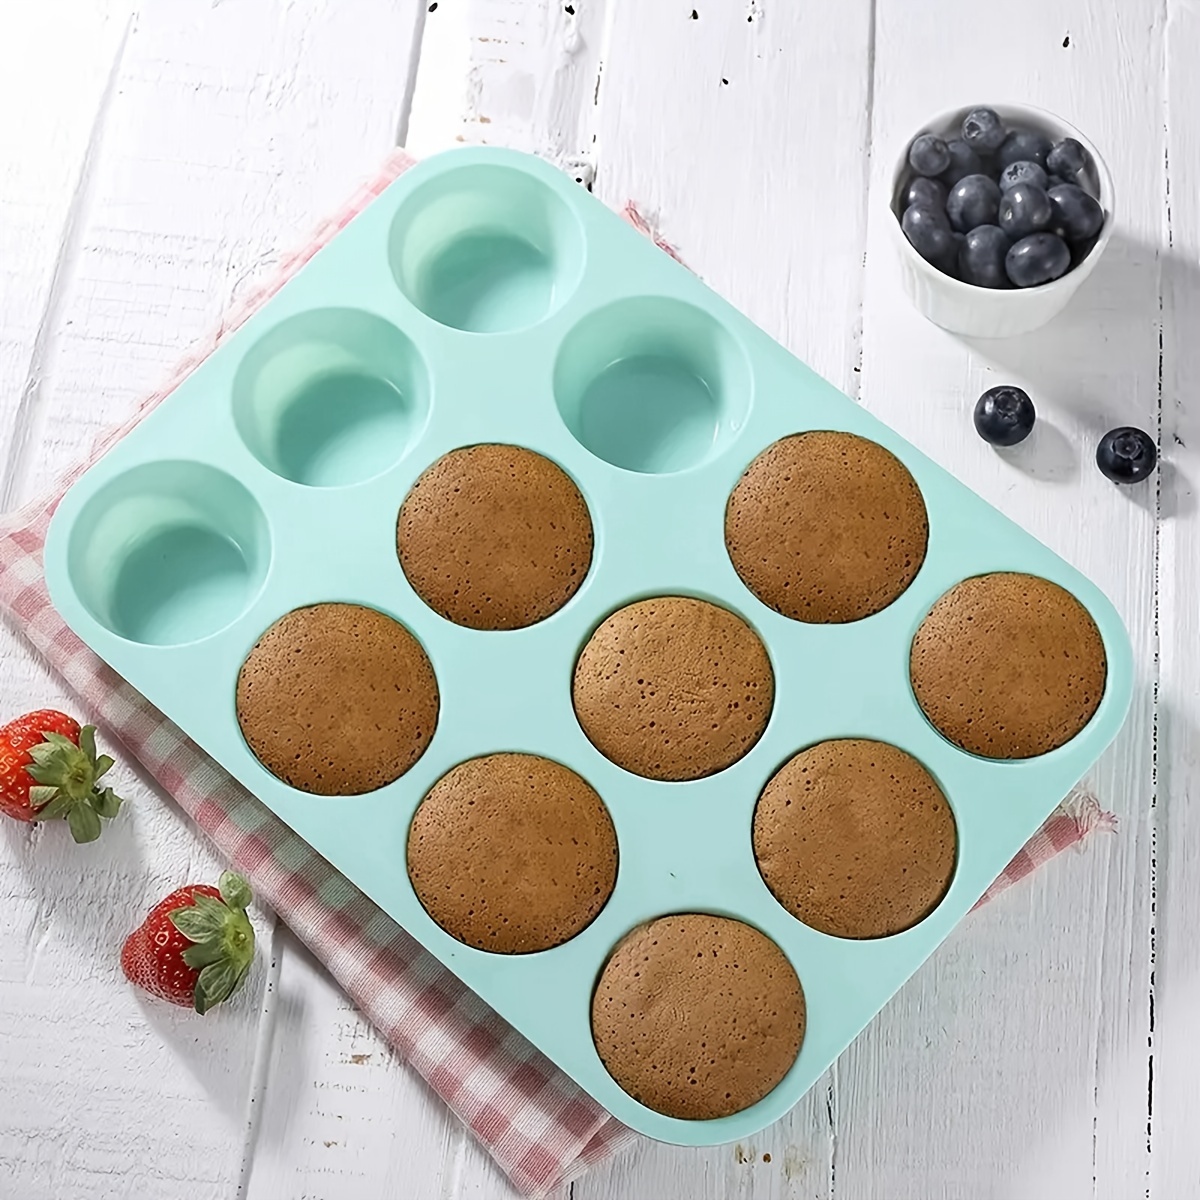 Walfos Silicone Brownie Pan 9-Cavity Non-stick Square Baking Pan, Perfect  for Brownies, Cornbread, Muffin and Cakes, BPA Free and Dishwasher Safe,  Set